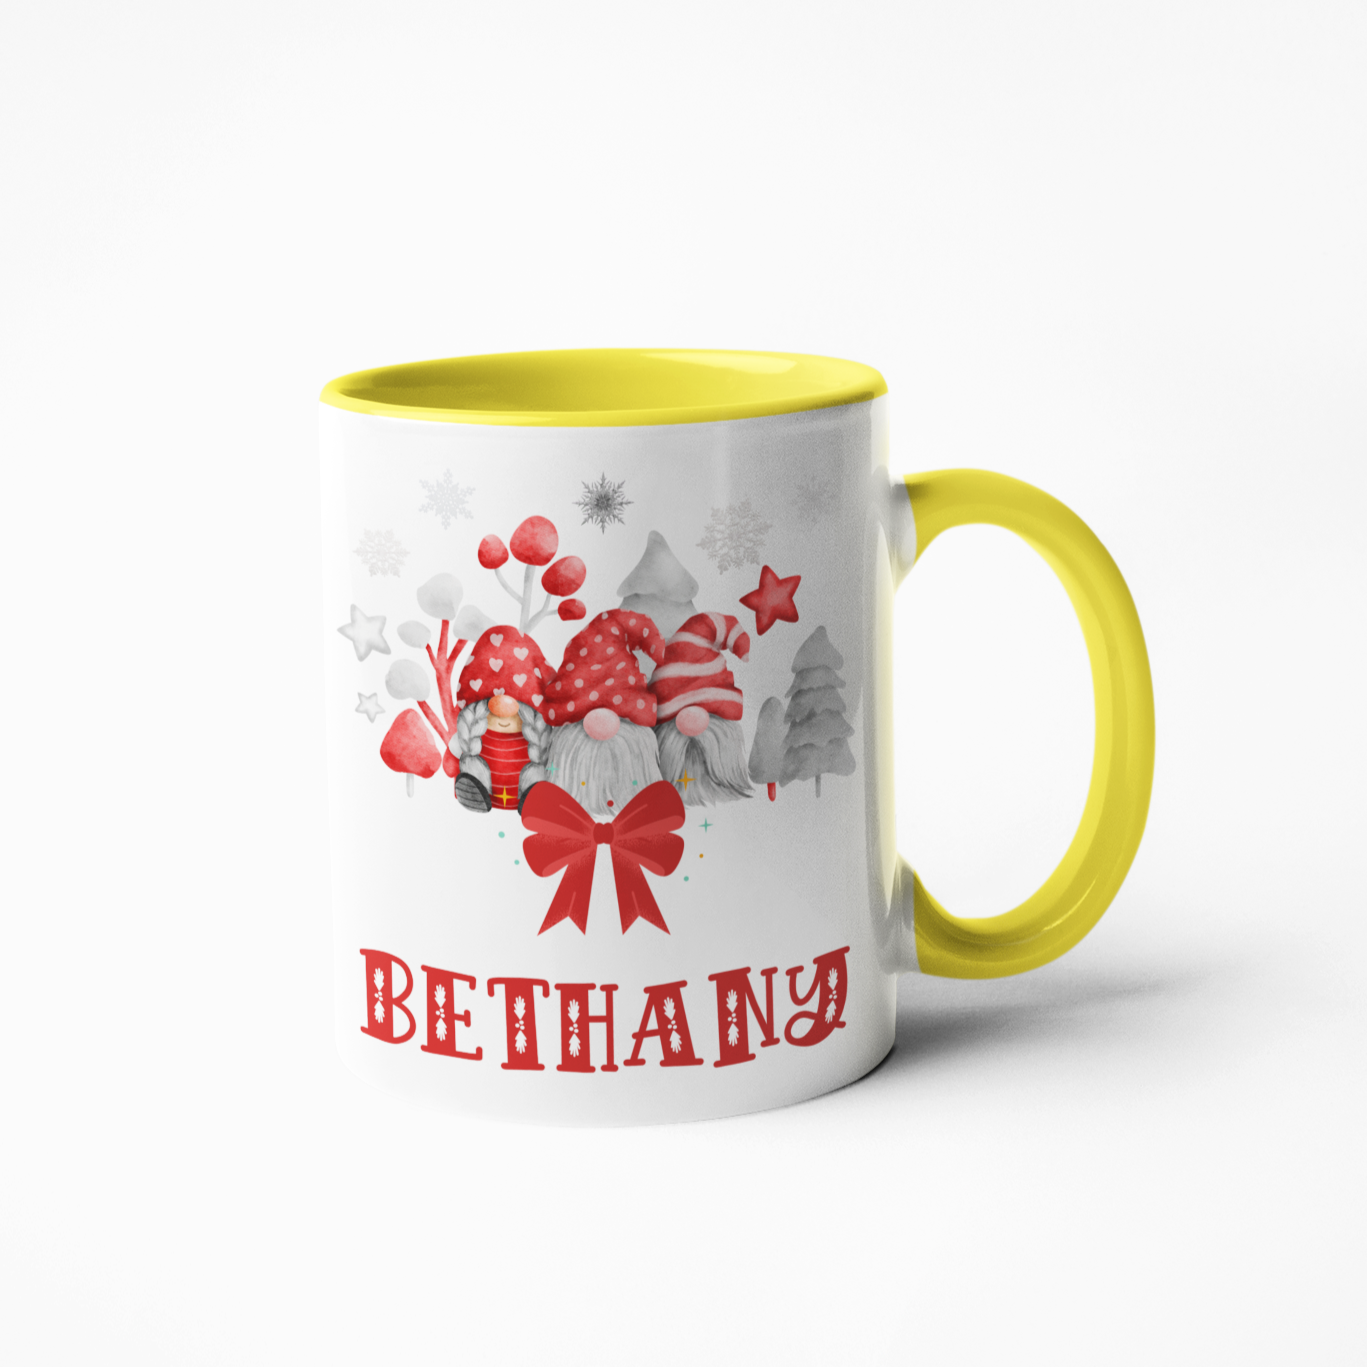 Savour your hot cocoa with a unique touch! Our personalised Gnome Christmas mug is a classic holiday design with your name, for a whimsical, festive feel. Enjoy your favourite drink with a special touch!